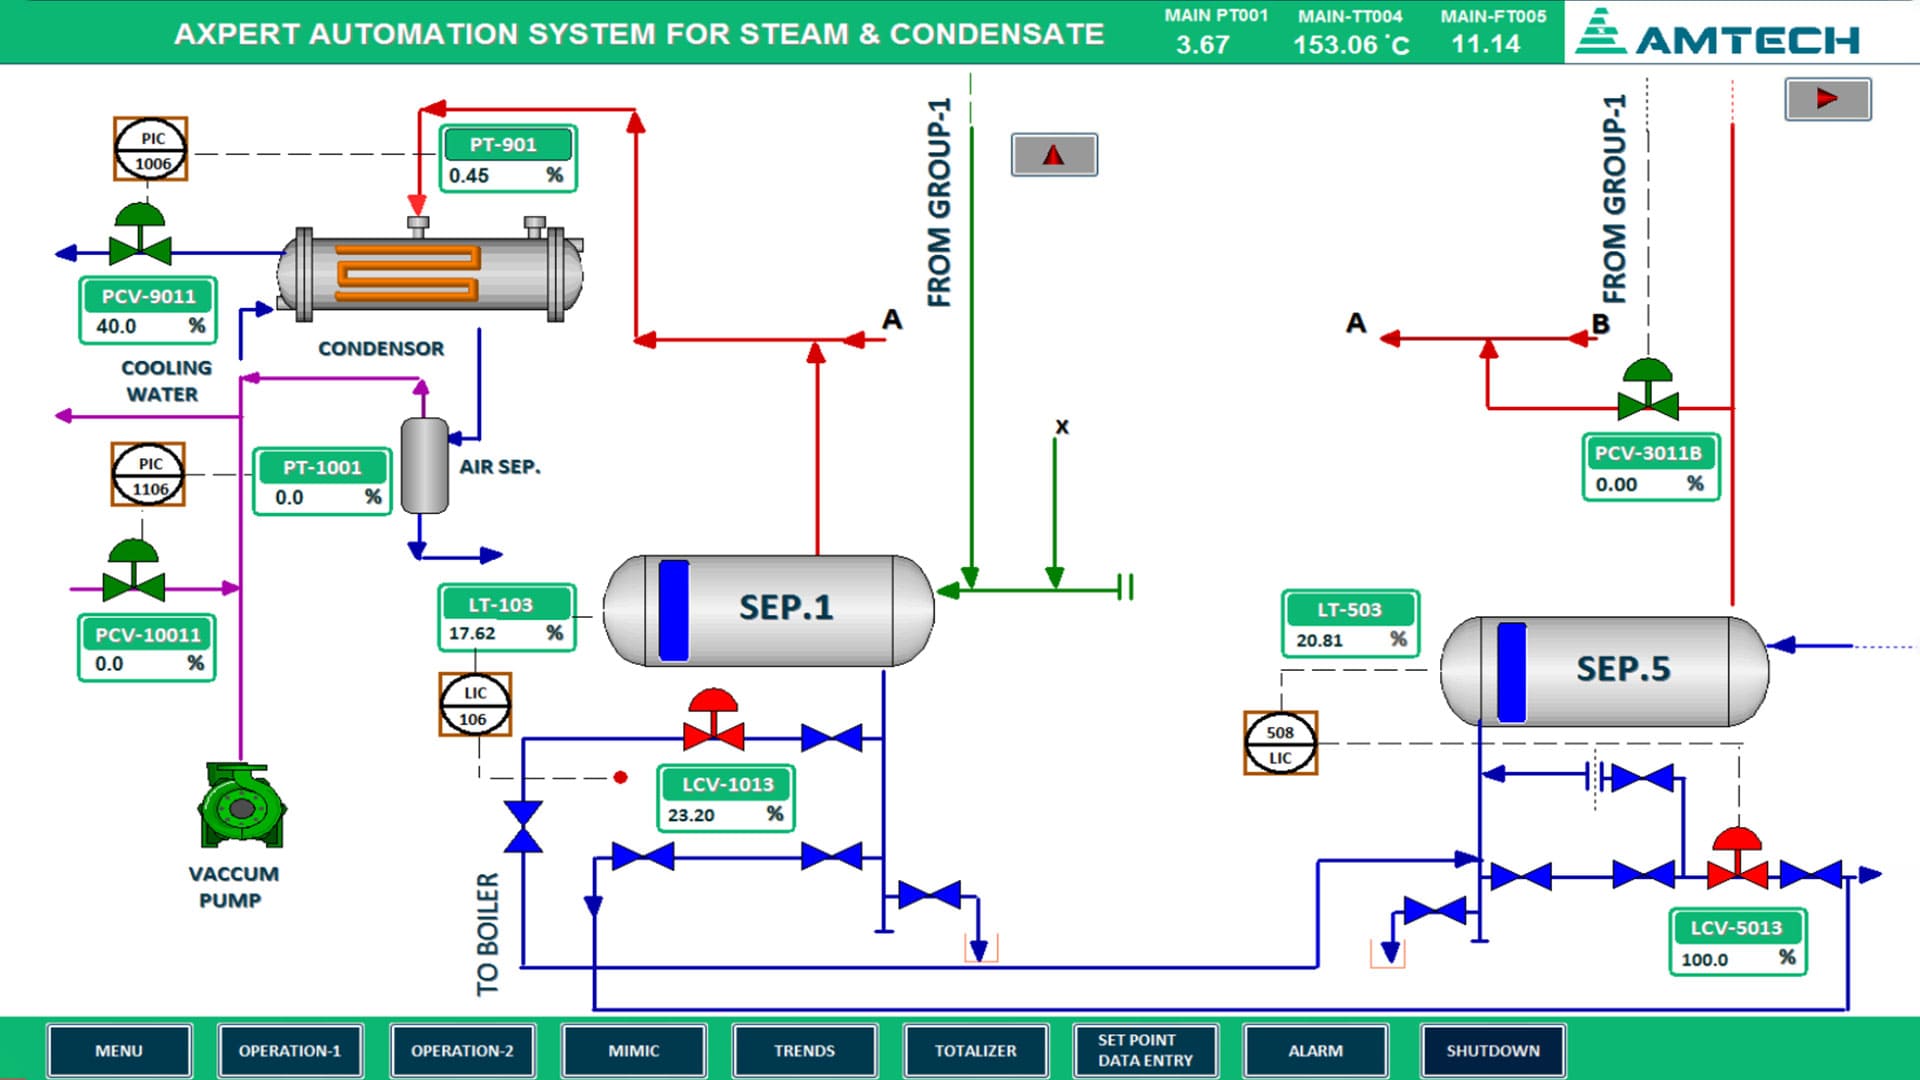 Amtech electronics steam-condensate-system automation